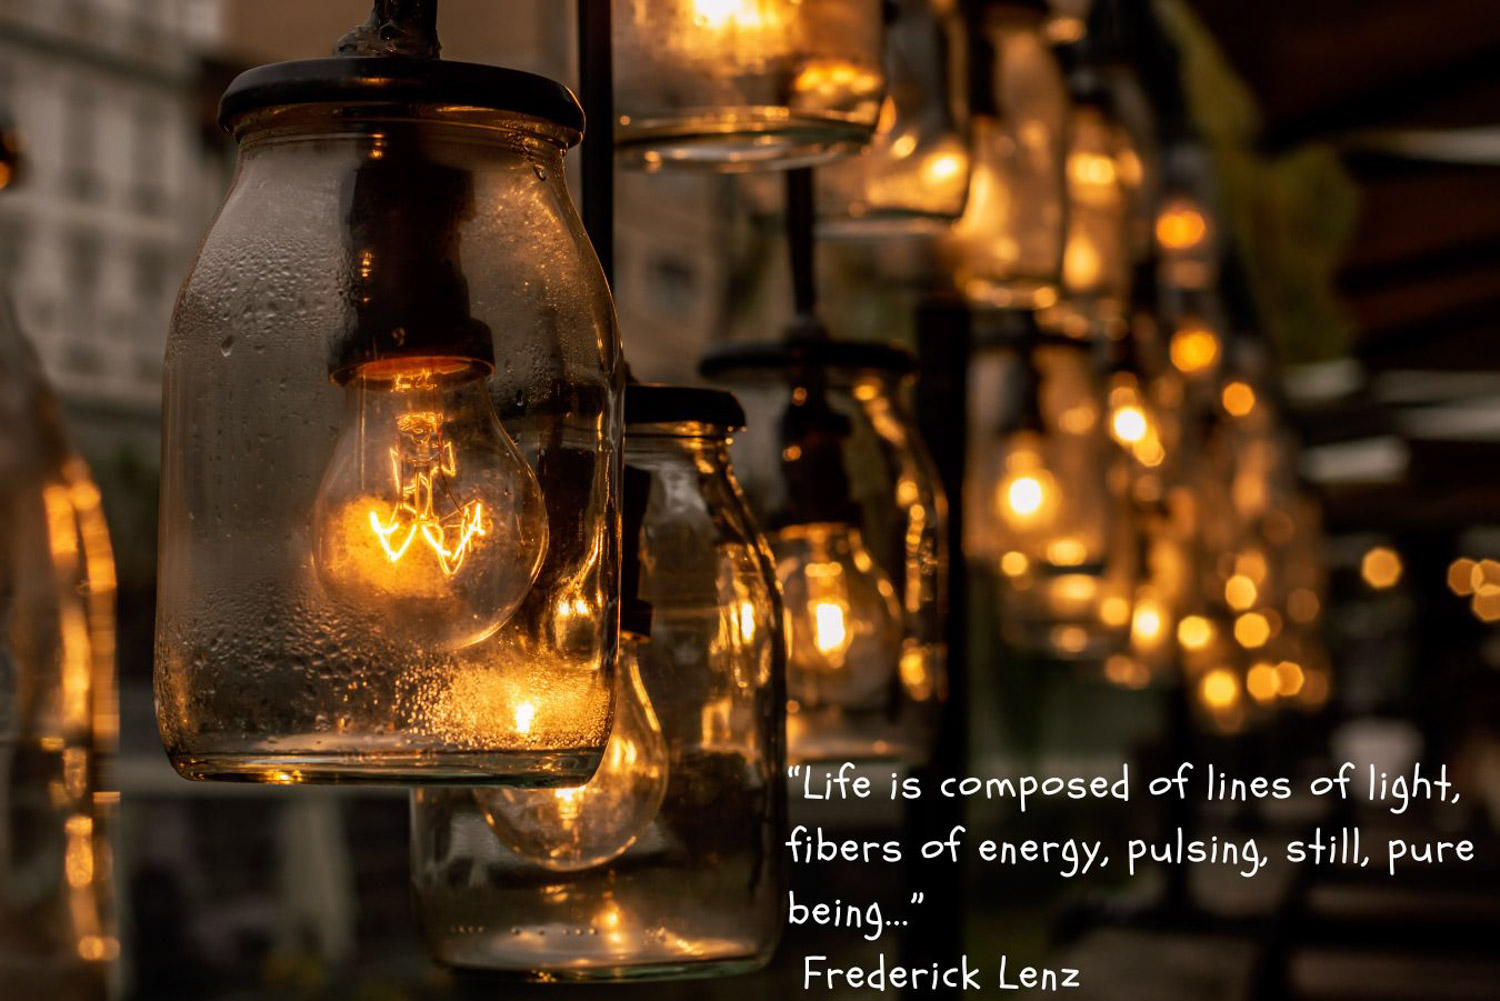 Uplifting quote about light